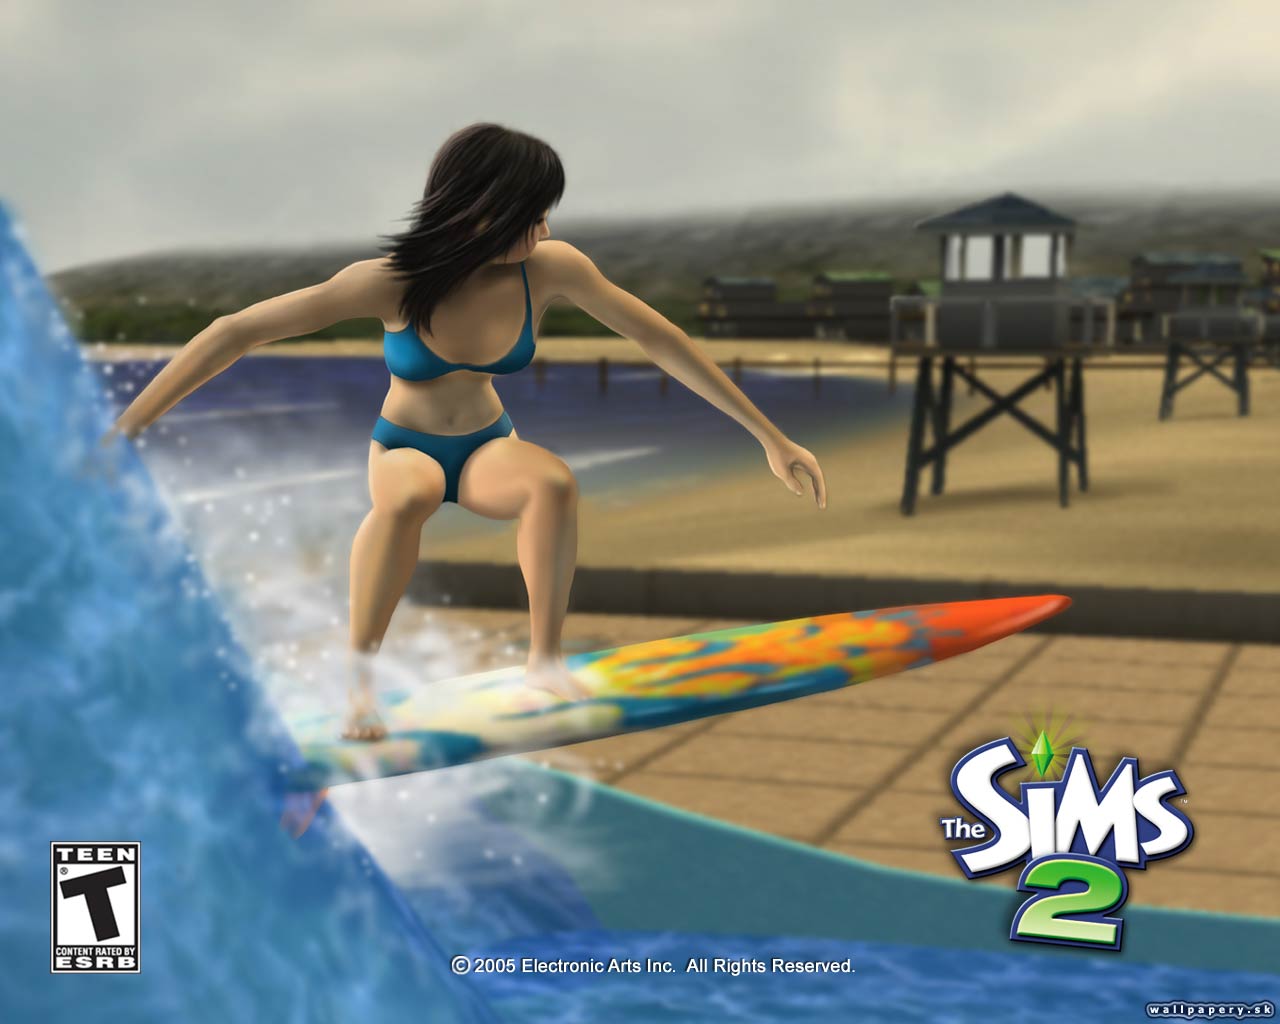 The Sims 2 - wallpaper 30